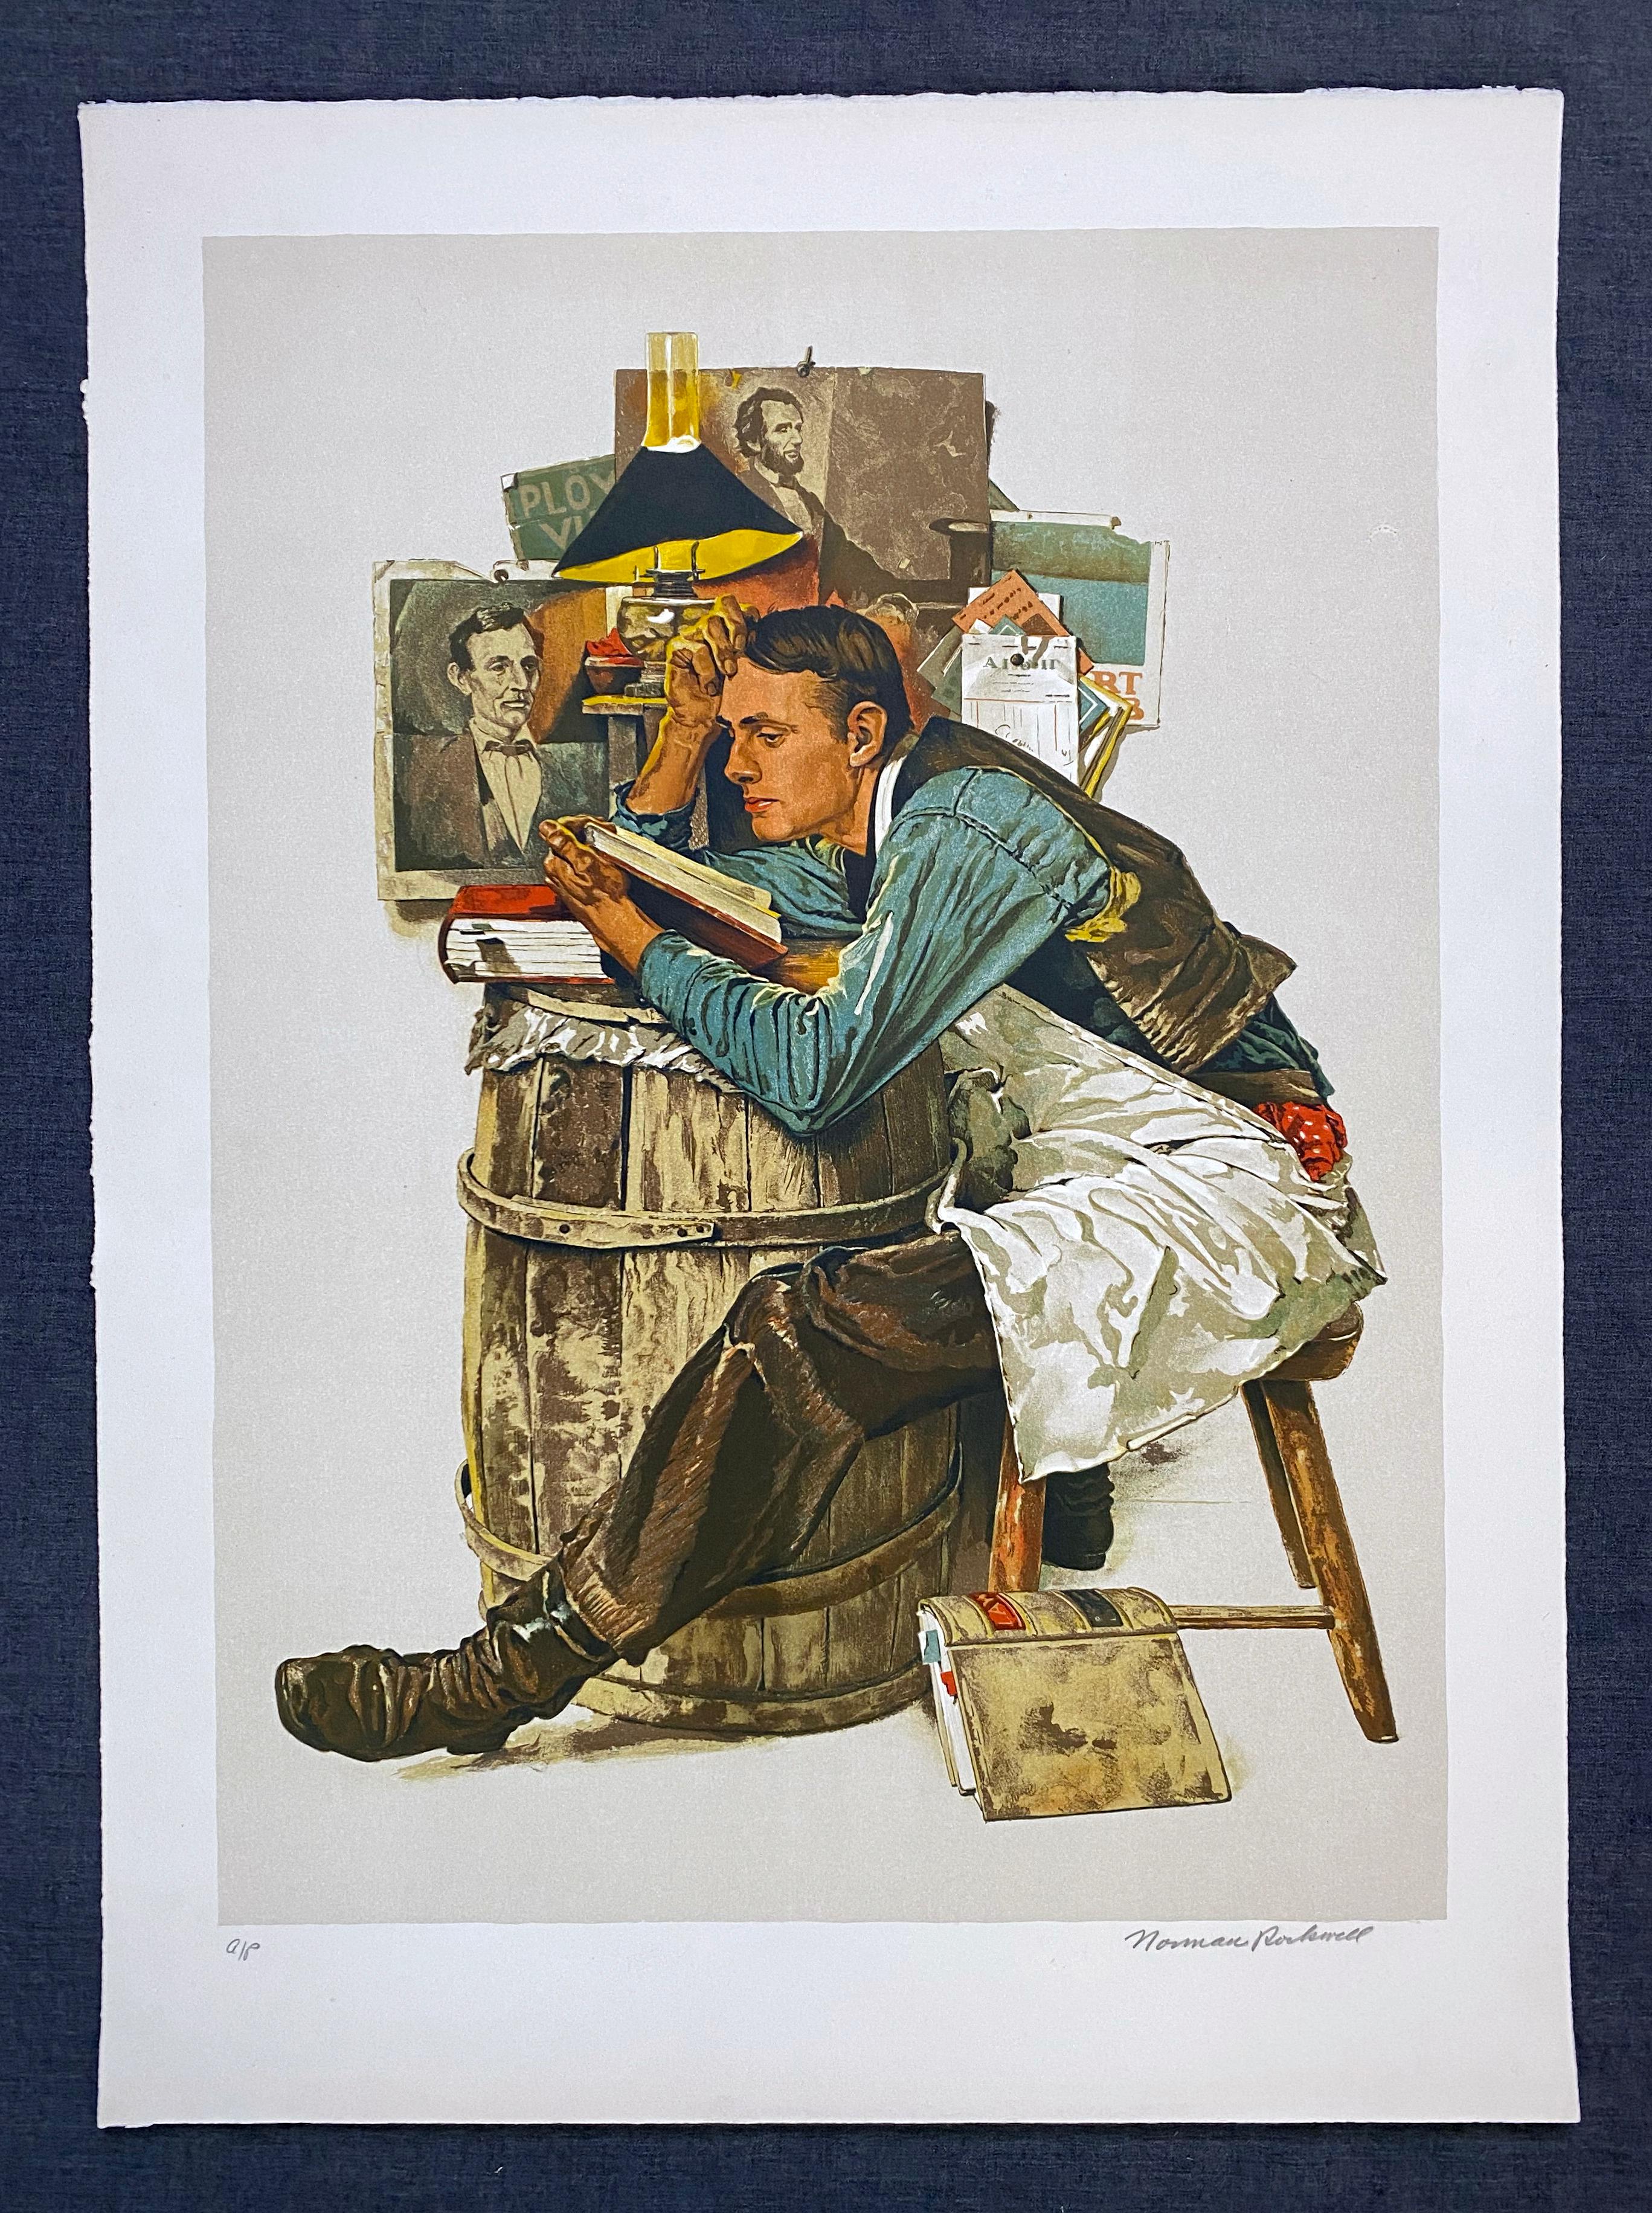  Law Student 1976 - Print by Norman Rockwell